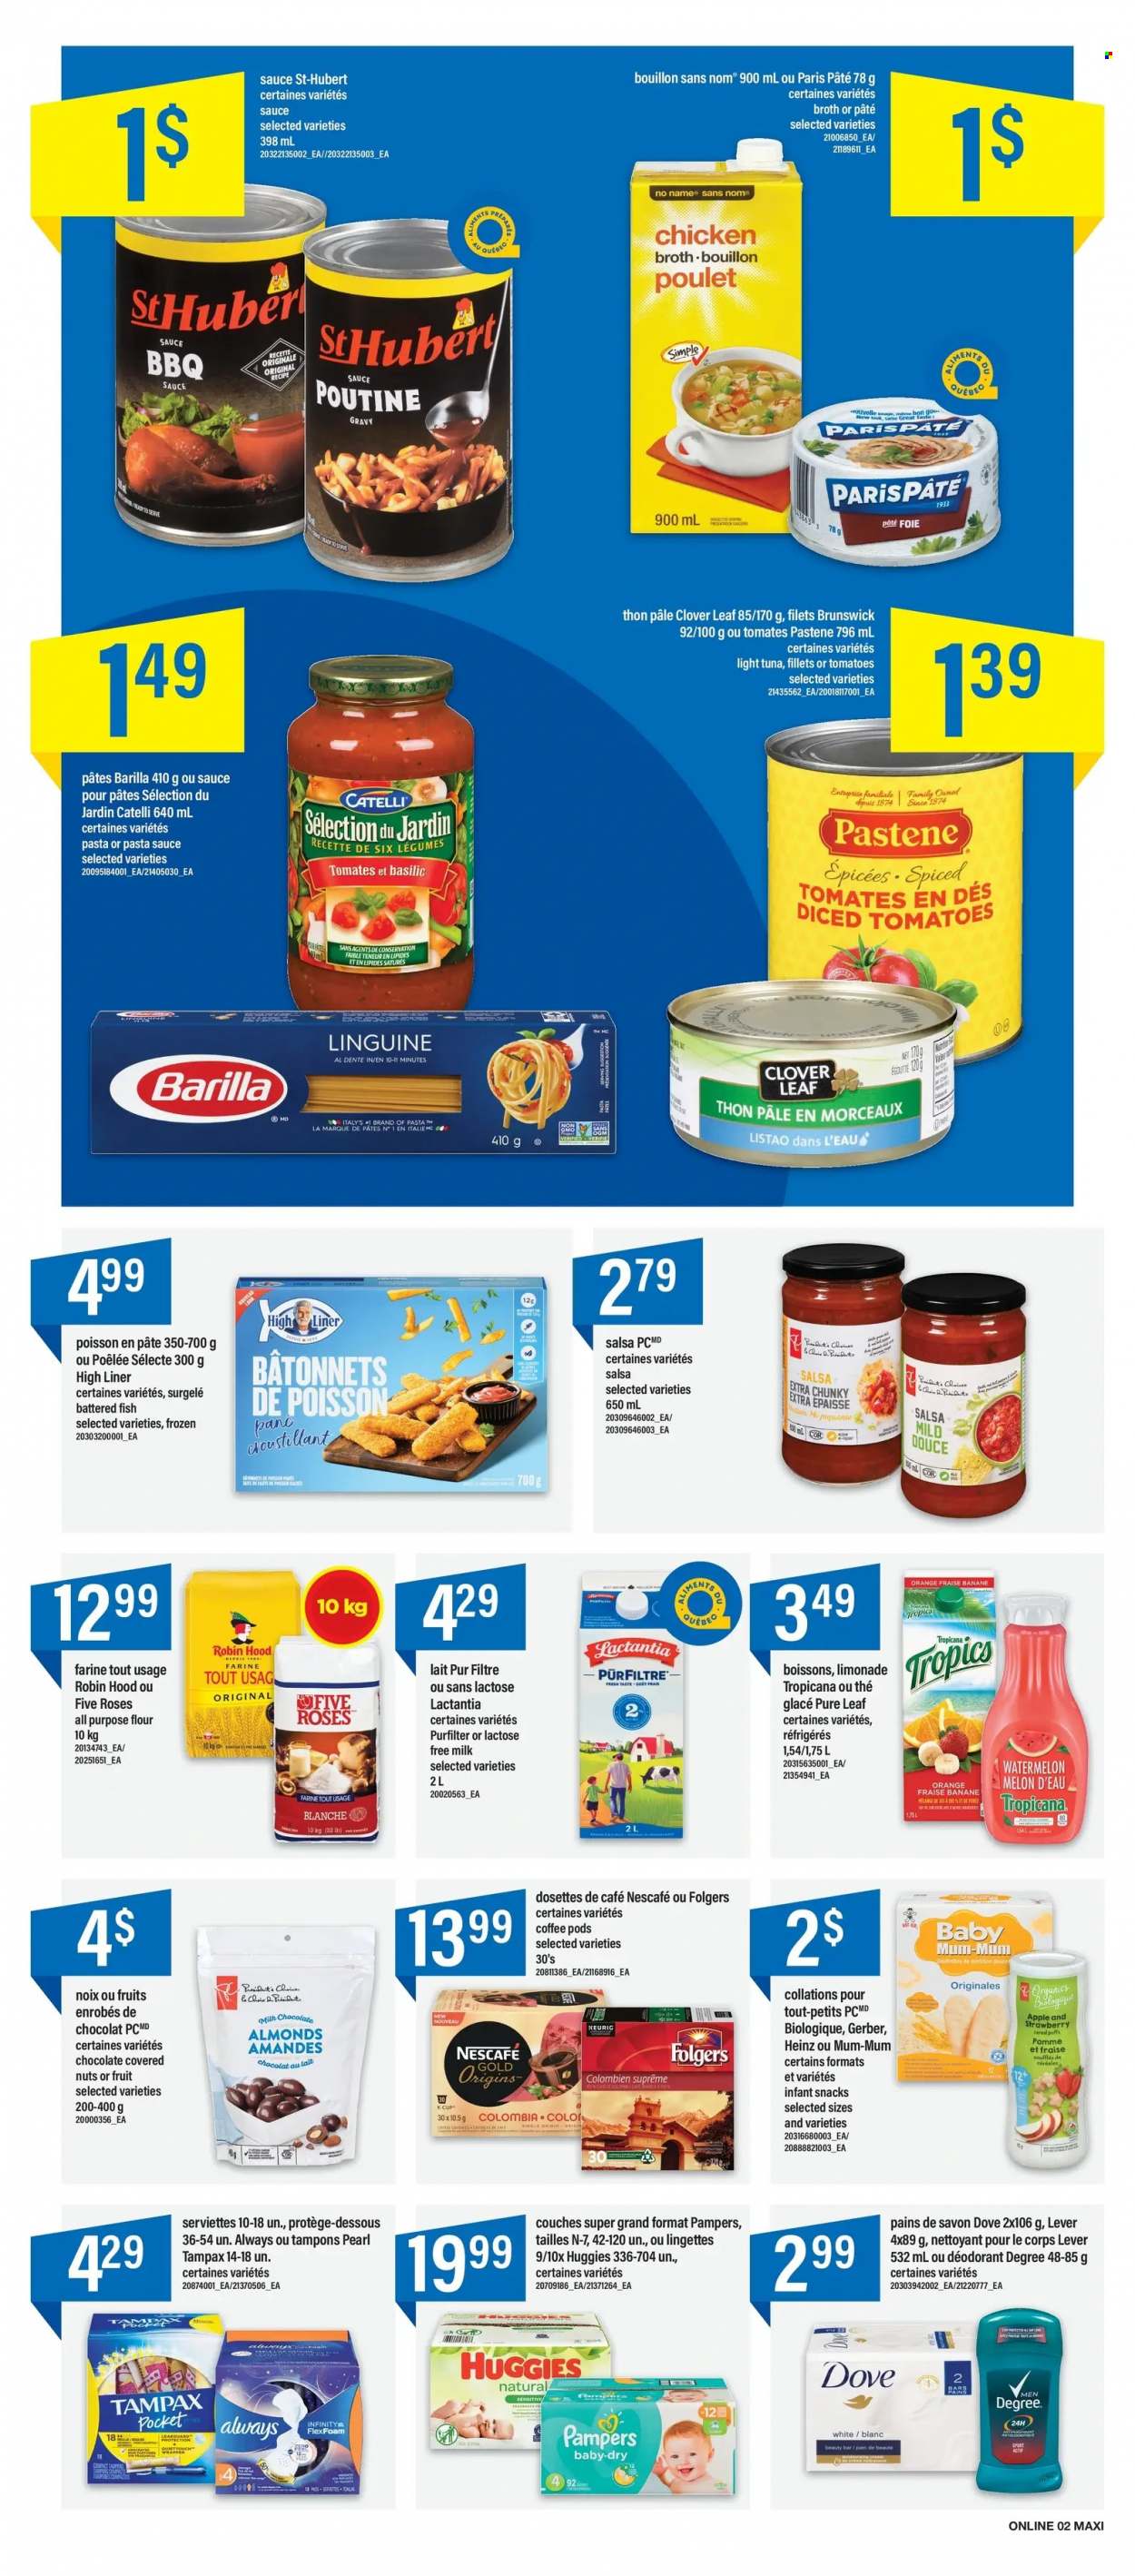 thumbnail - Maxi & Cie Flyer - May 12, 2022 - May 18, 2022 - Sales products - puffs, tomatoes, watermelon, melons, fish, No Name, pasta sauce, sauce, Clover, milk, snack, Gerber, all purpose flour, bouillon, flour, broth, light tuna, diced tomatoes, cereals, salsa, almonds, Pure Leaf, coffee pods, Folgers, coffee capsules, K-Cups, Keurig, tampons, Infinity, anti-perspirant, Mum, Dove, Tampax, Heinz, Huggies, Pampers, Nescafé, oranges, Barilla, deodorant. Page 8.